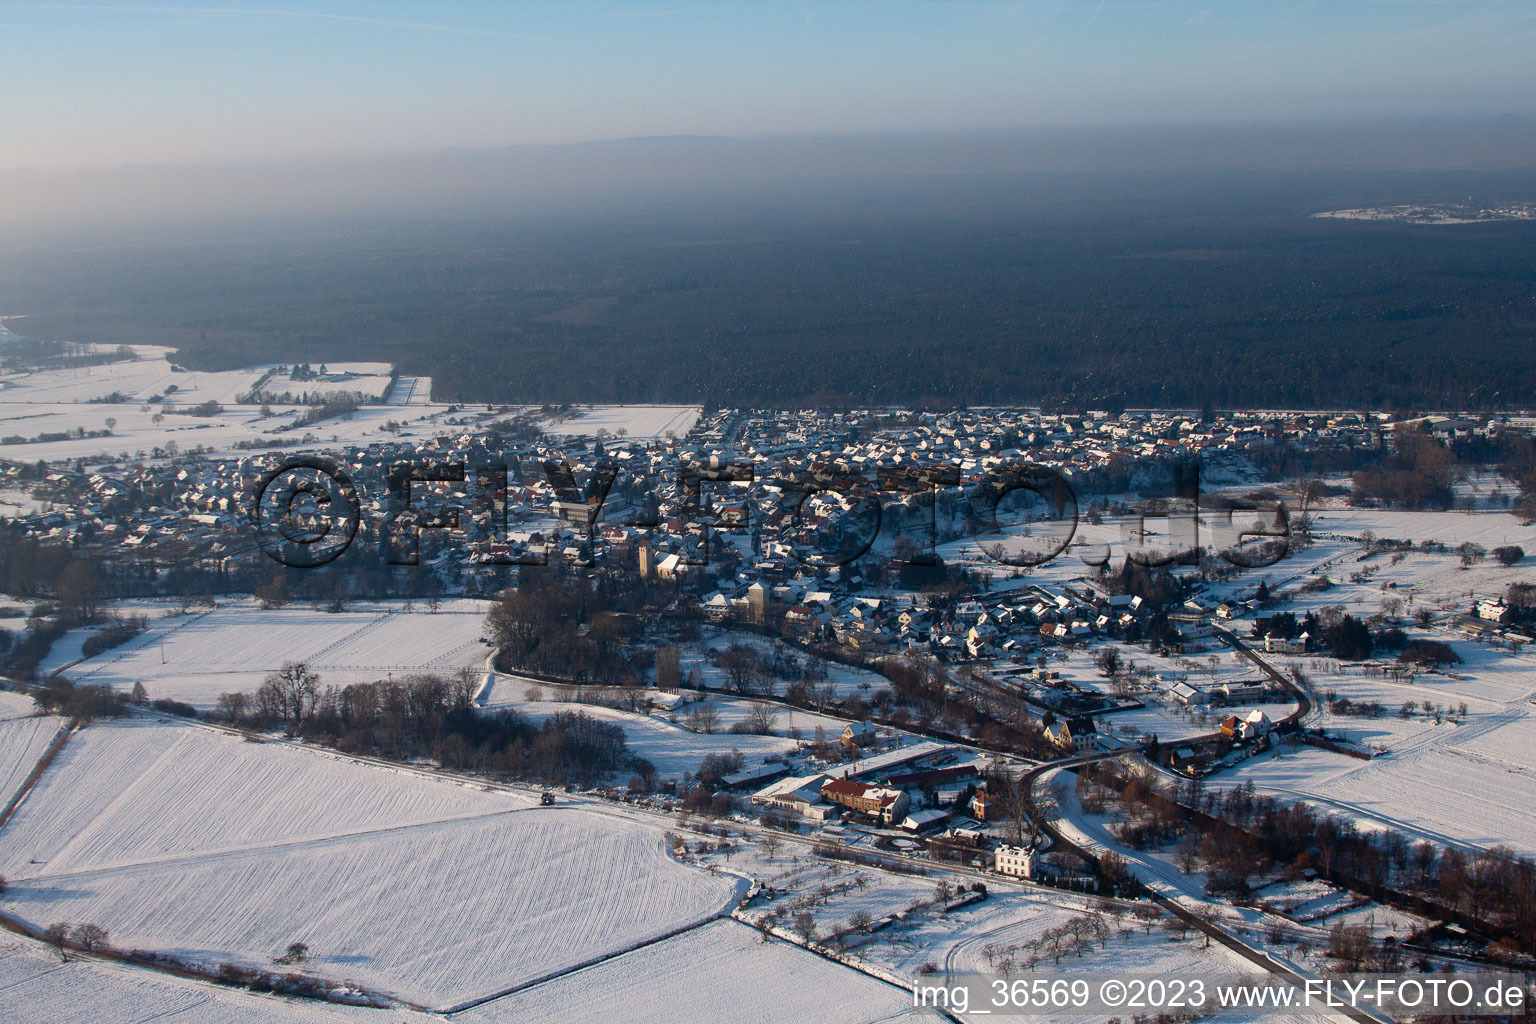 Berg in the state Rhineland-Palatinate, Germany out of the air